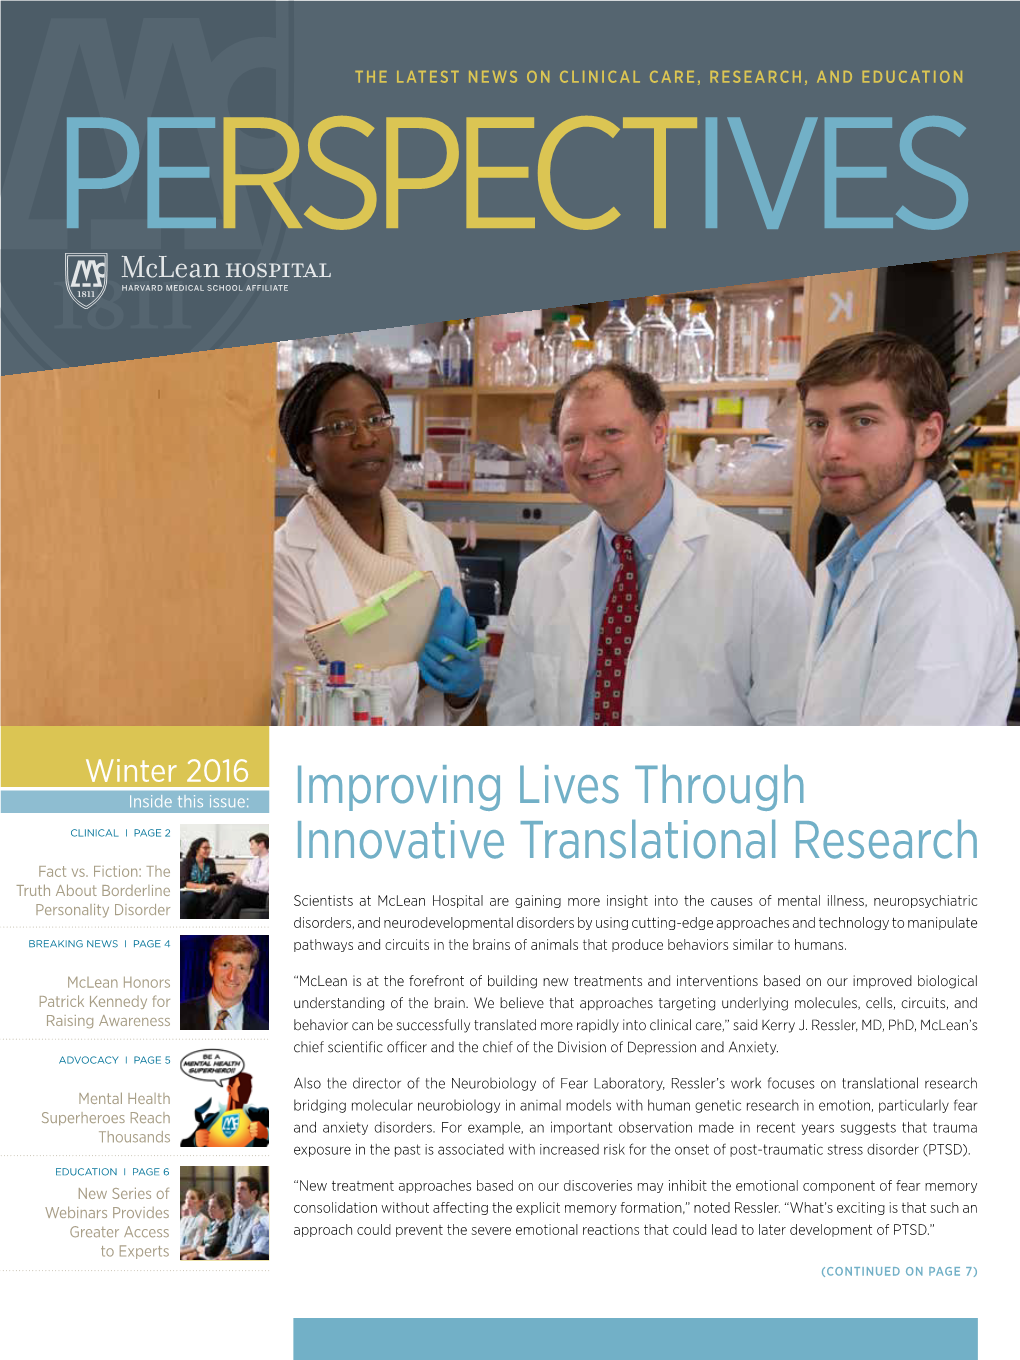 Improving Lives Through Innovative Translational Research